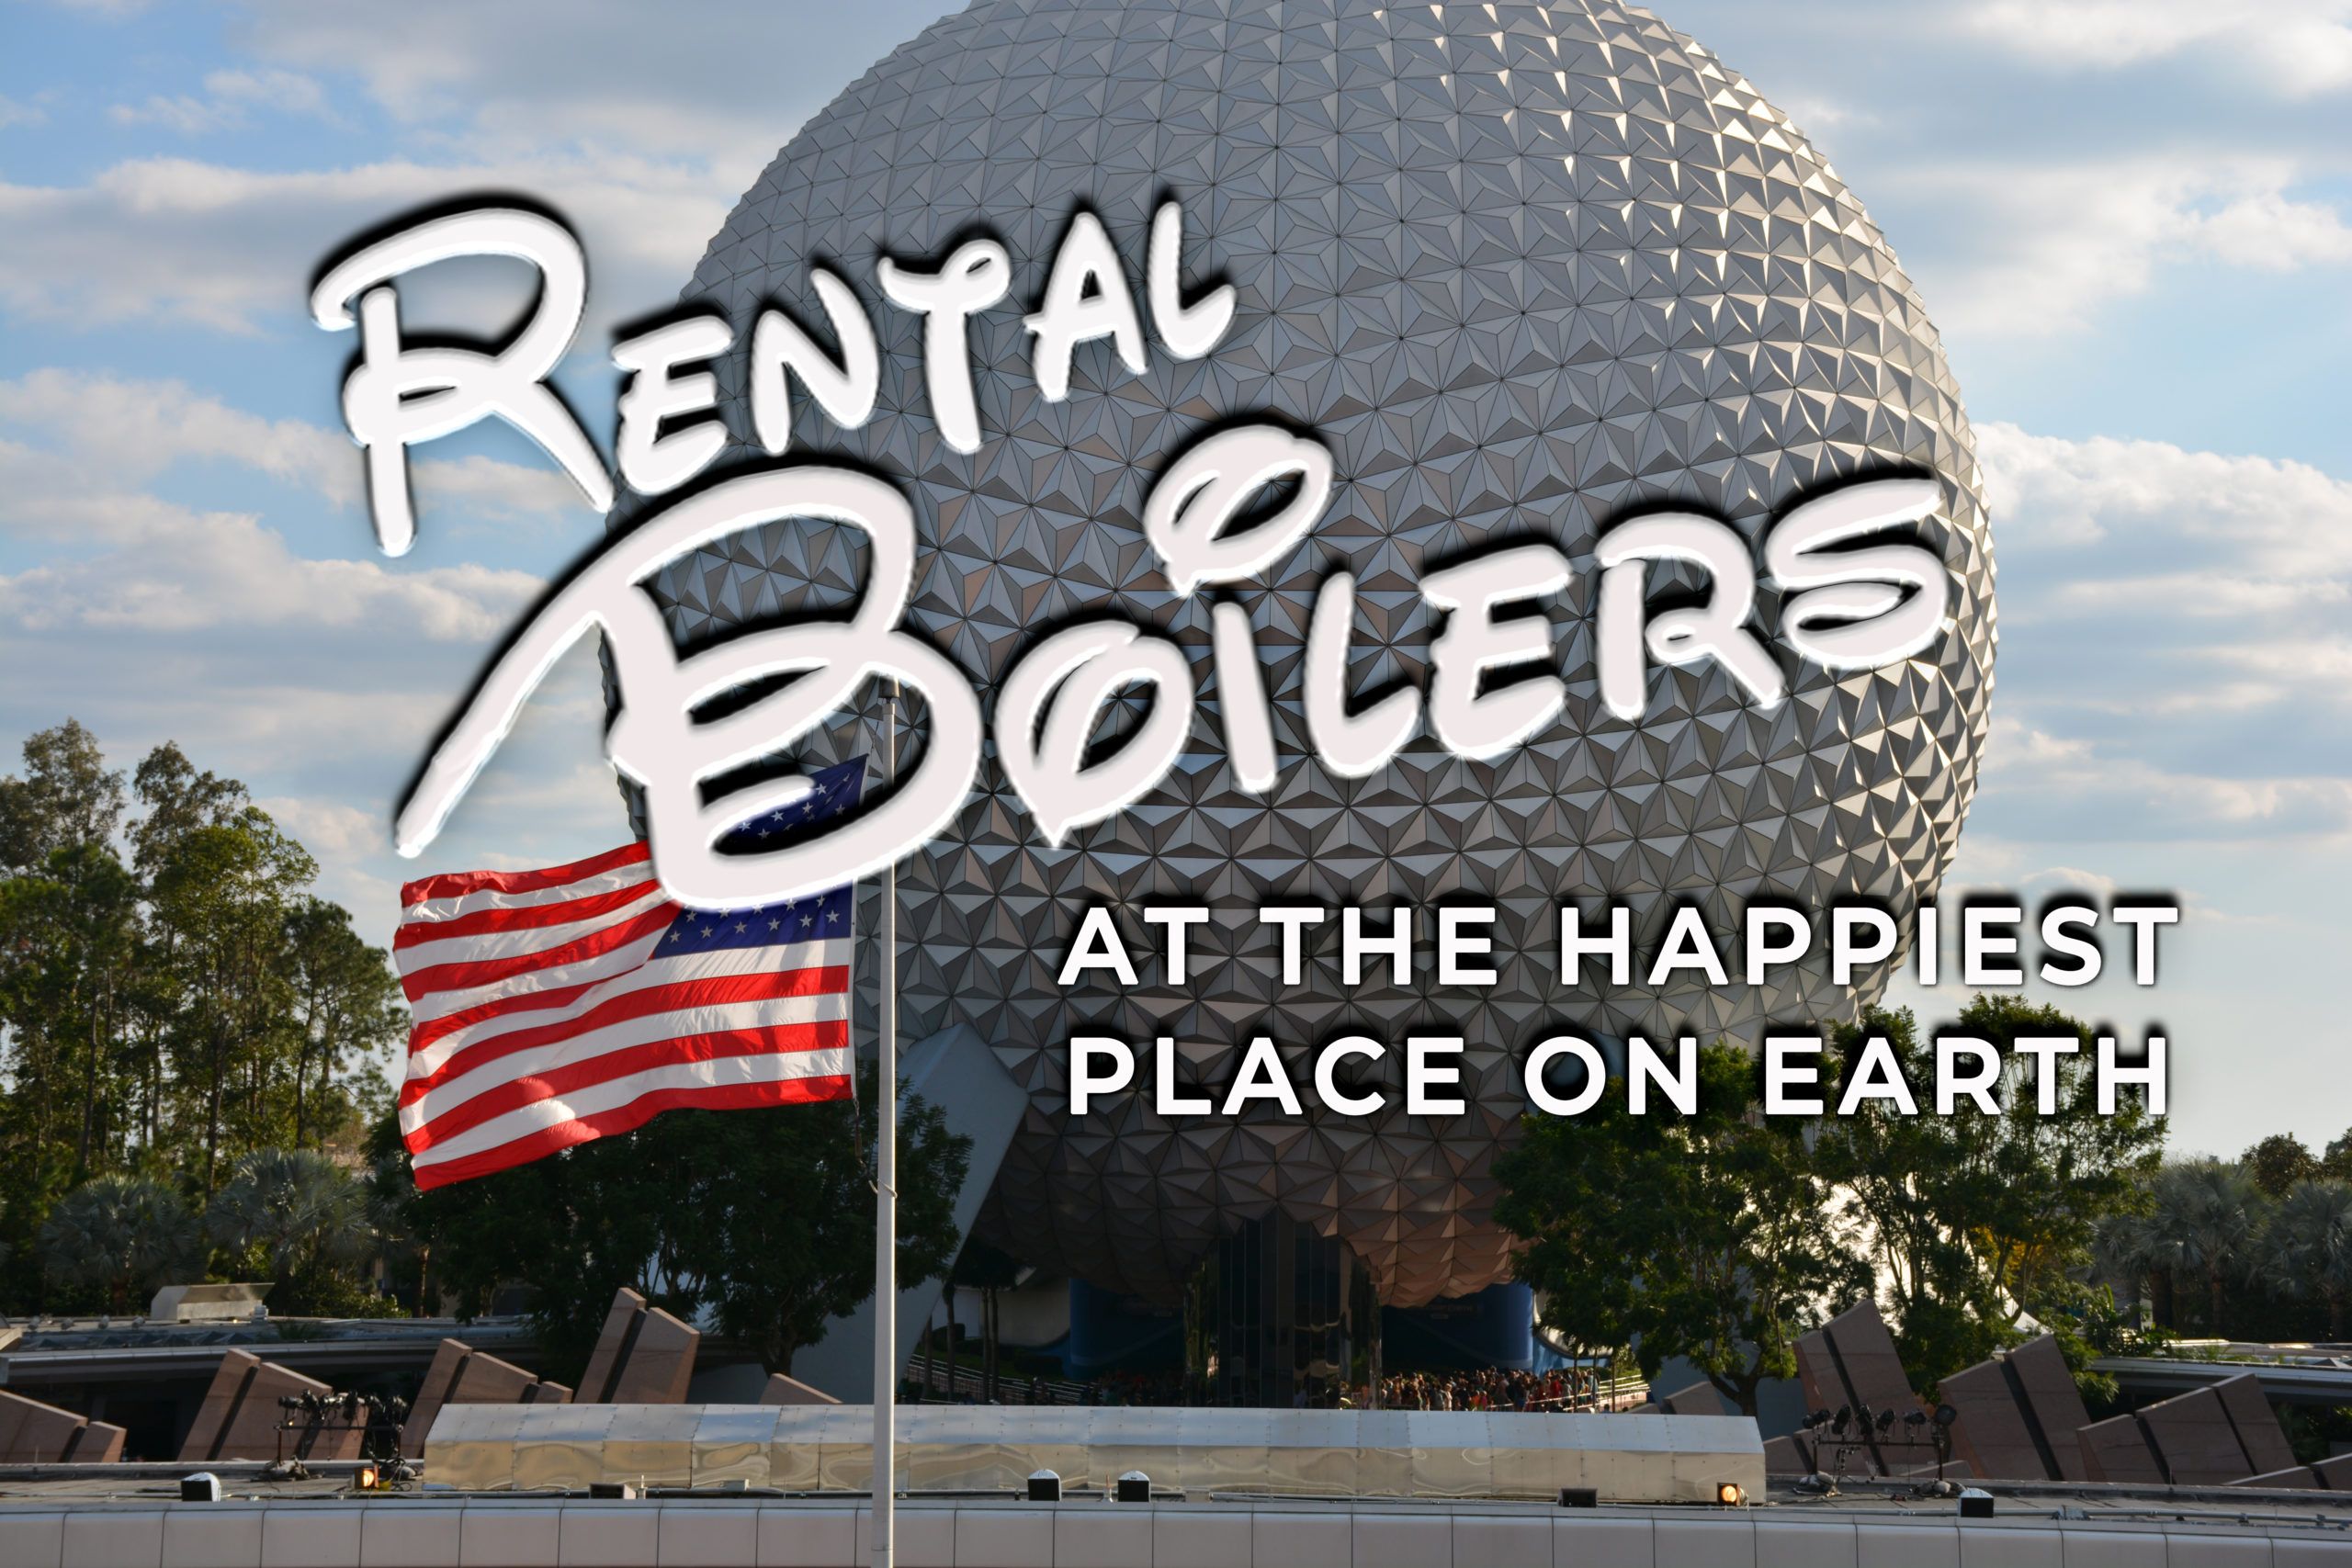 Rental Boilers at the Happiest Place on Earth